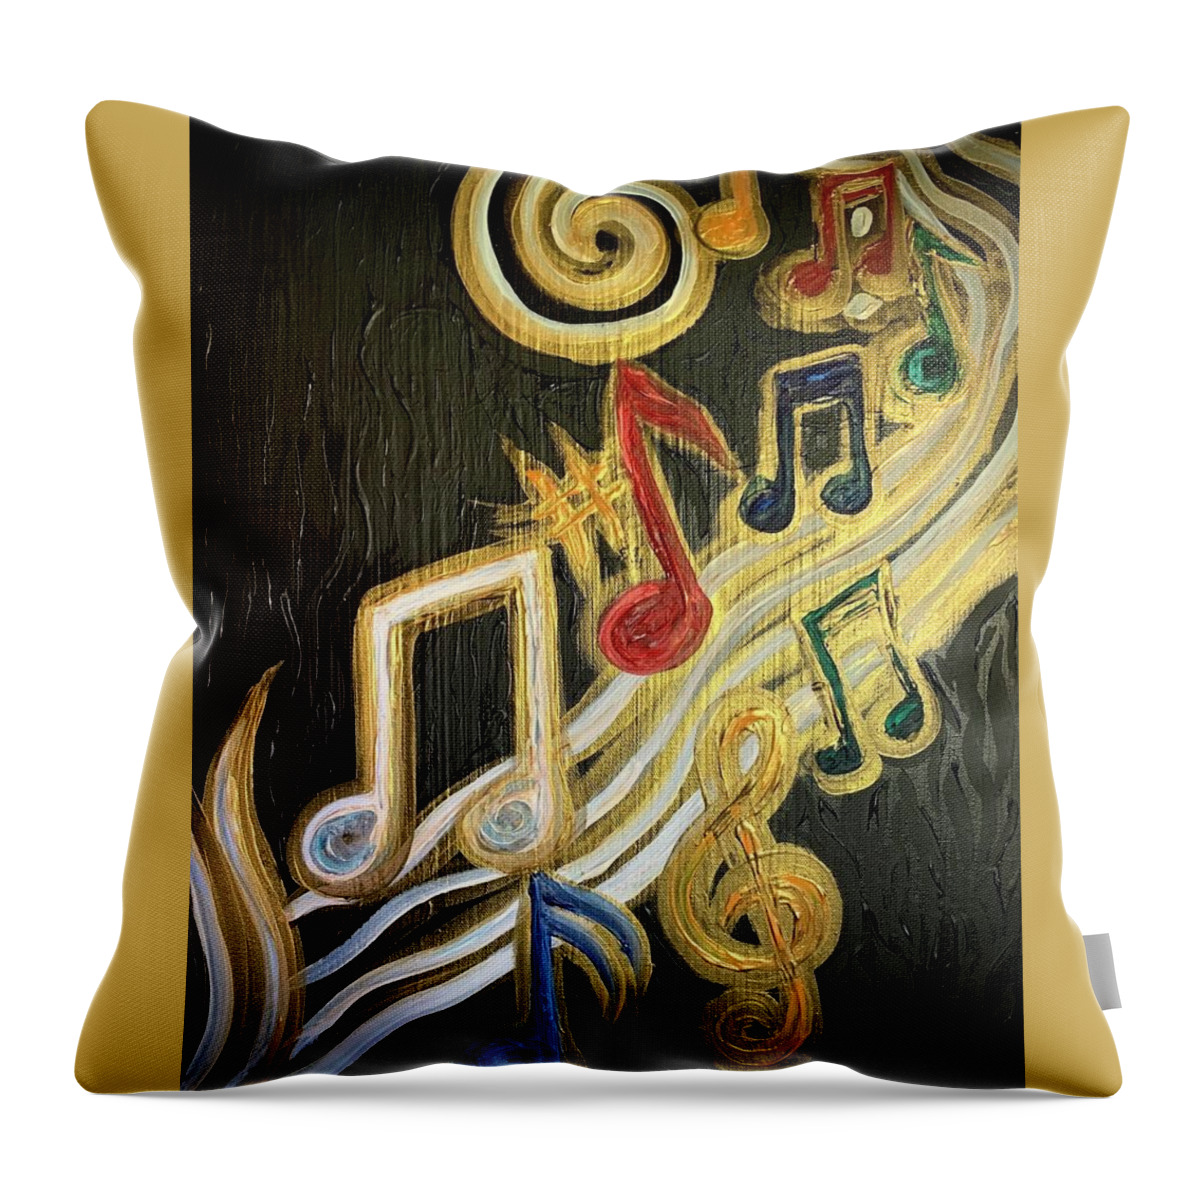 Joy Of Music Throw Pillow featuring the painting Joy of Music by Michelle Pier